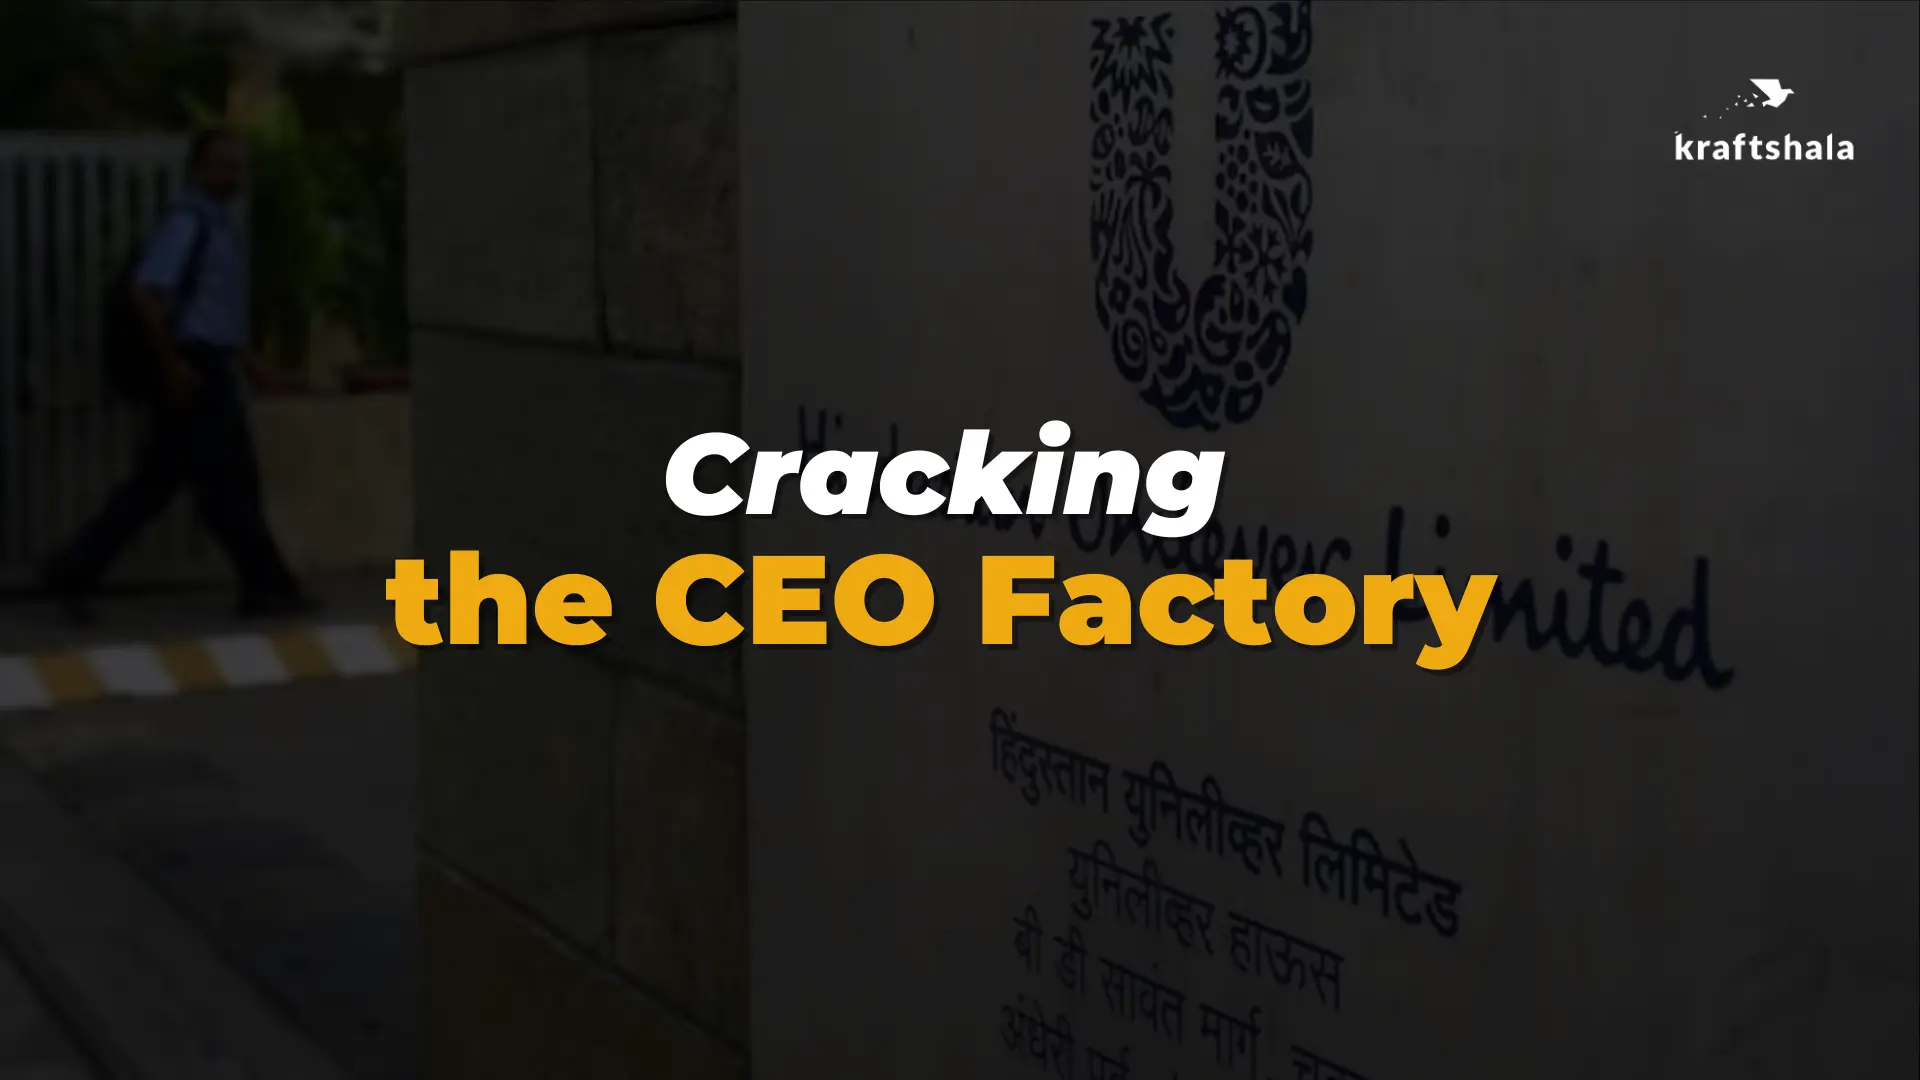 How to Crack the CEO Factory?